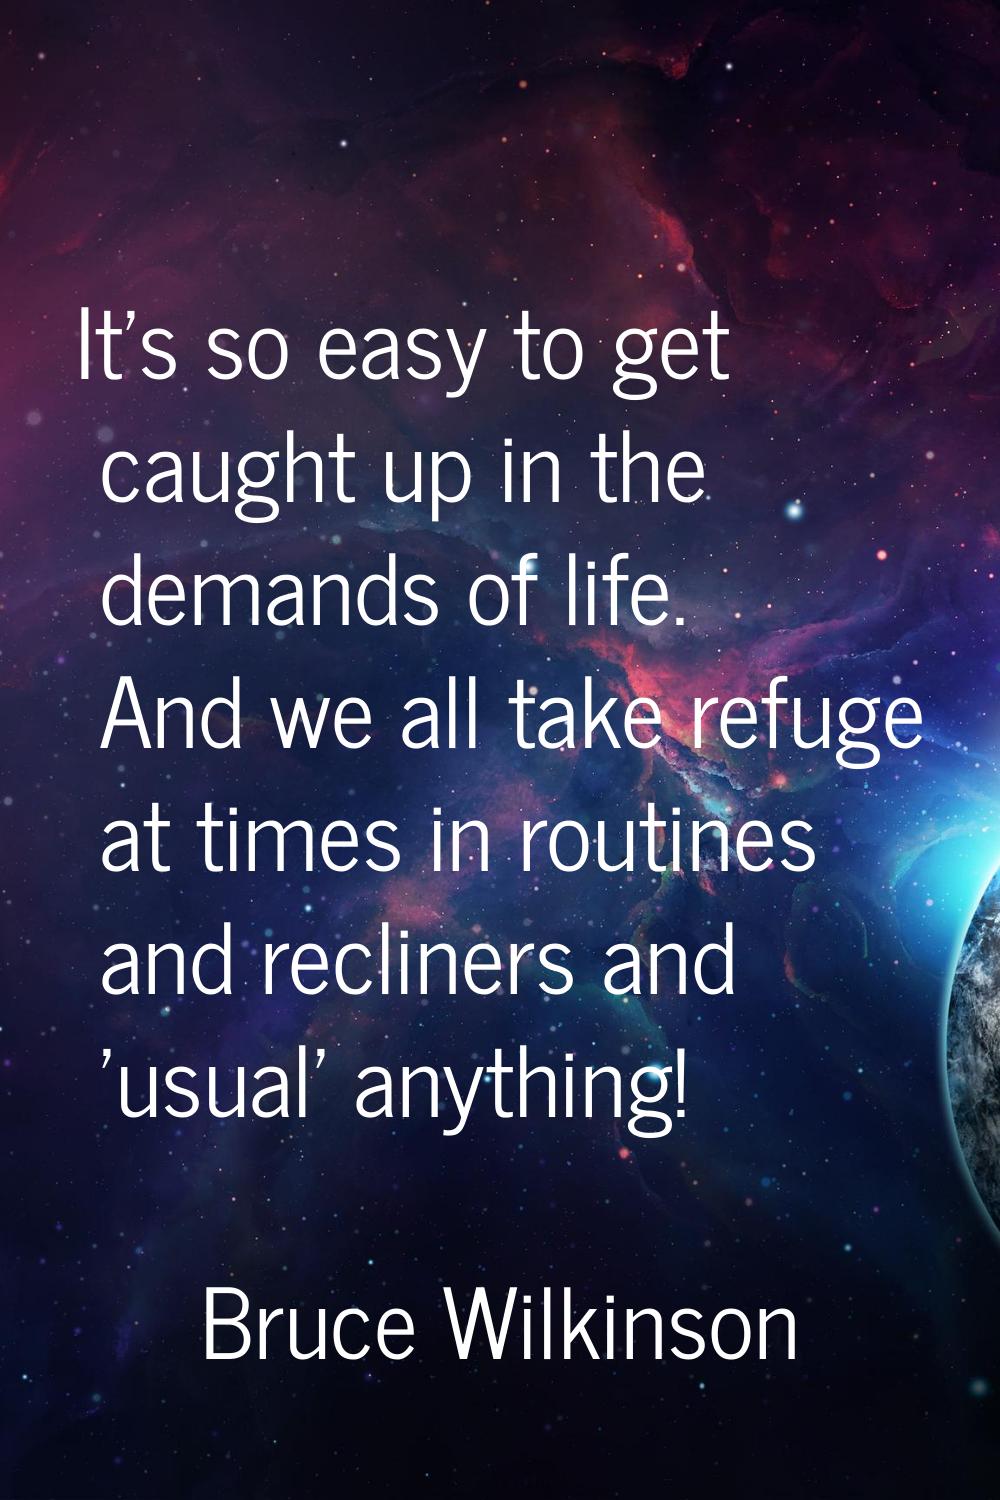 It's so easy to get caught up in the demands of life. And we all take refuge at times in routines a